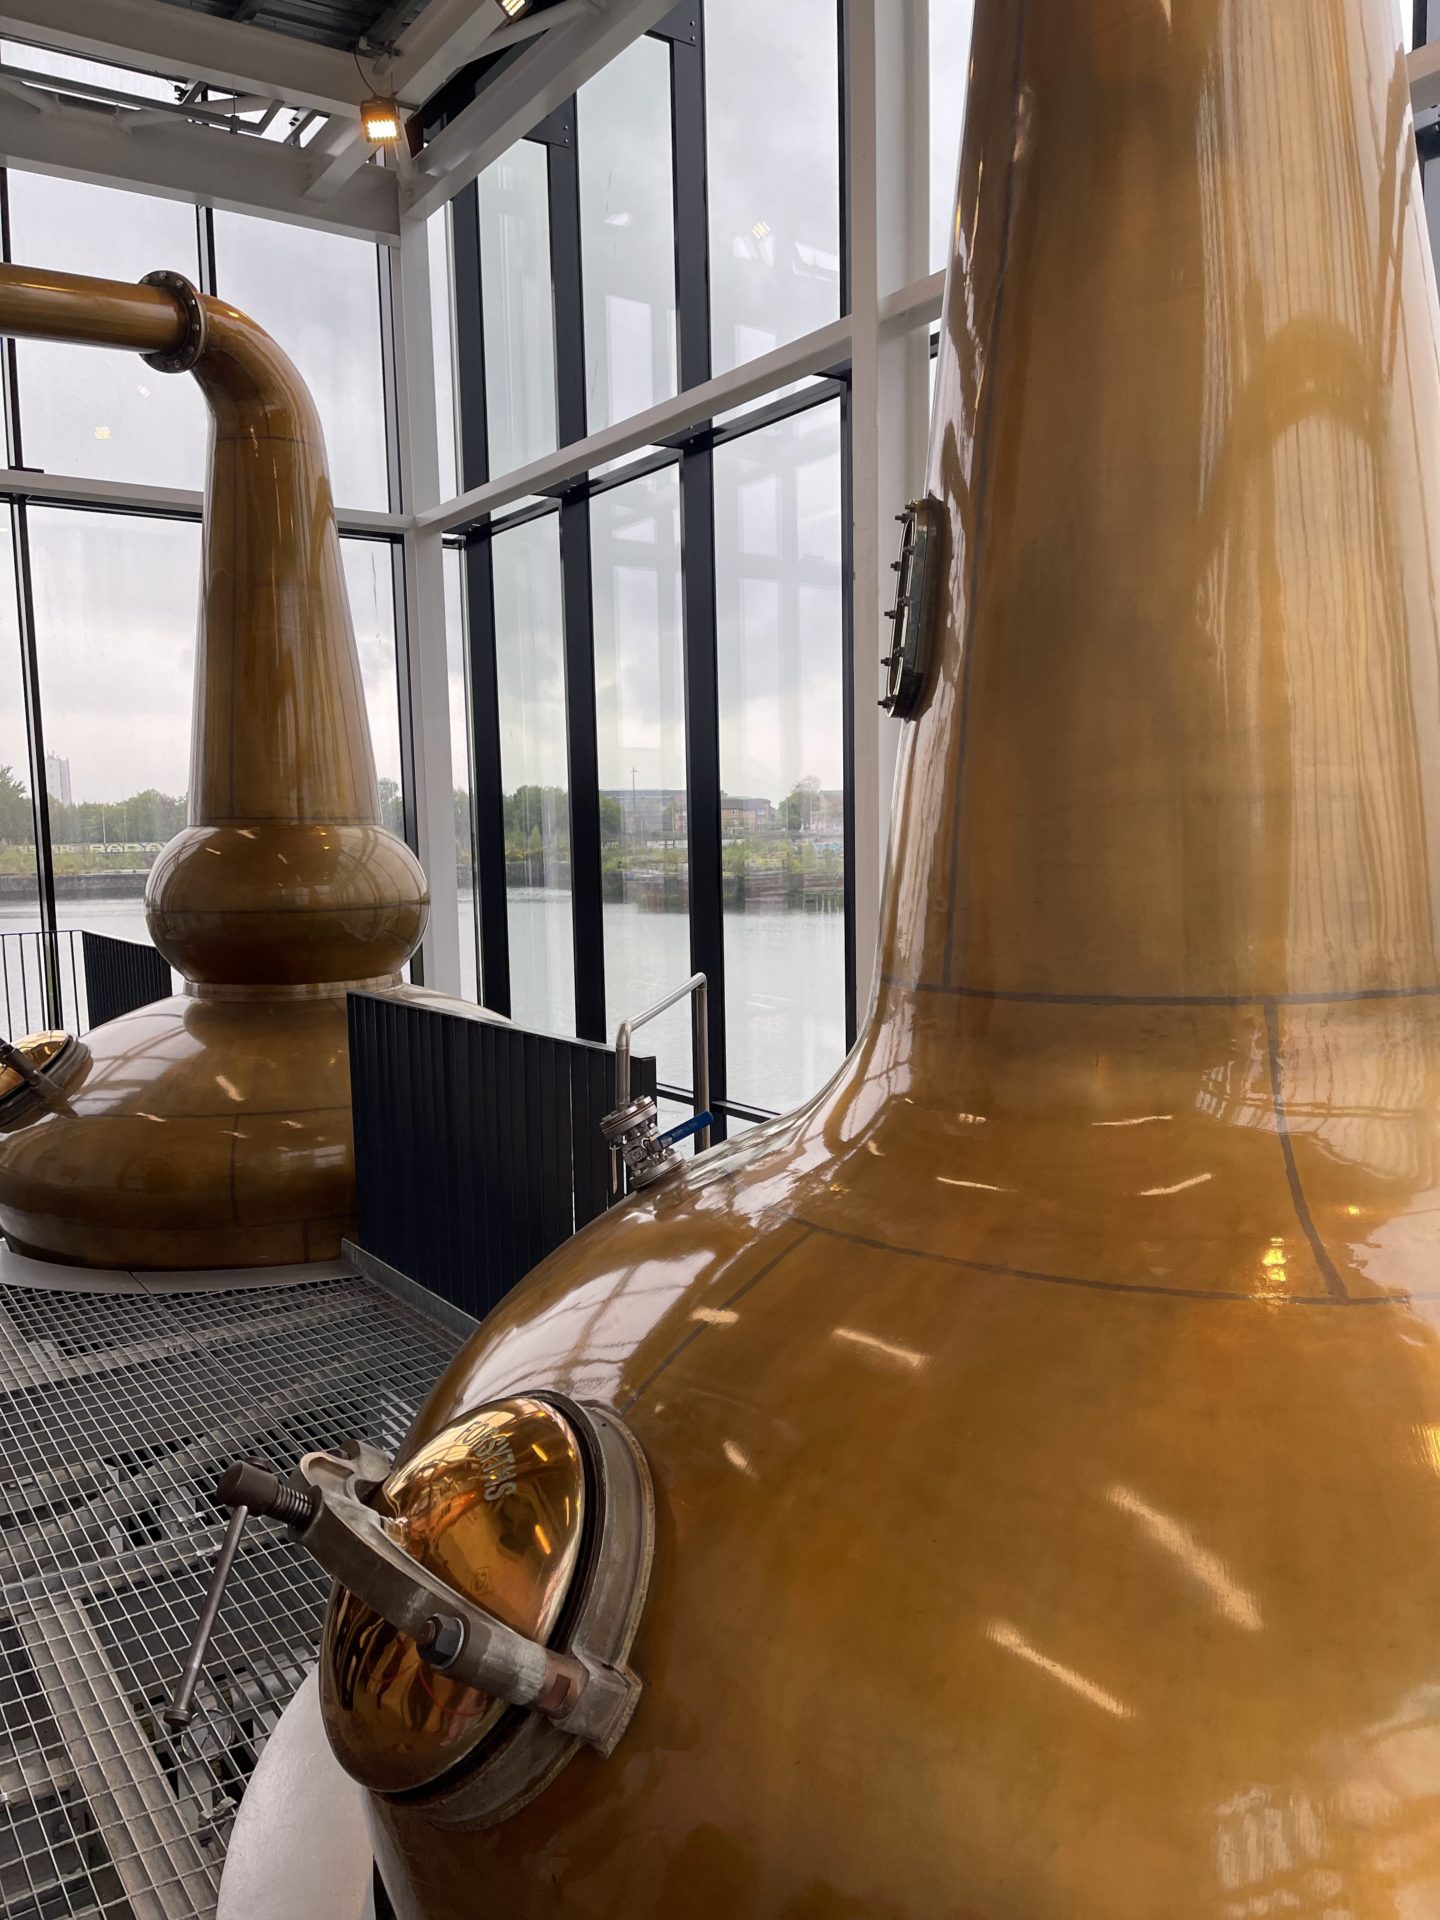 clydeside distillery copper still - Travel Contests: September 28th, 2022 - Scotland, NYC, Italy, & more